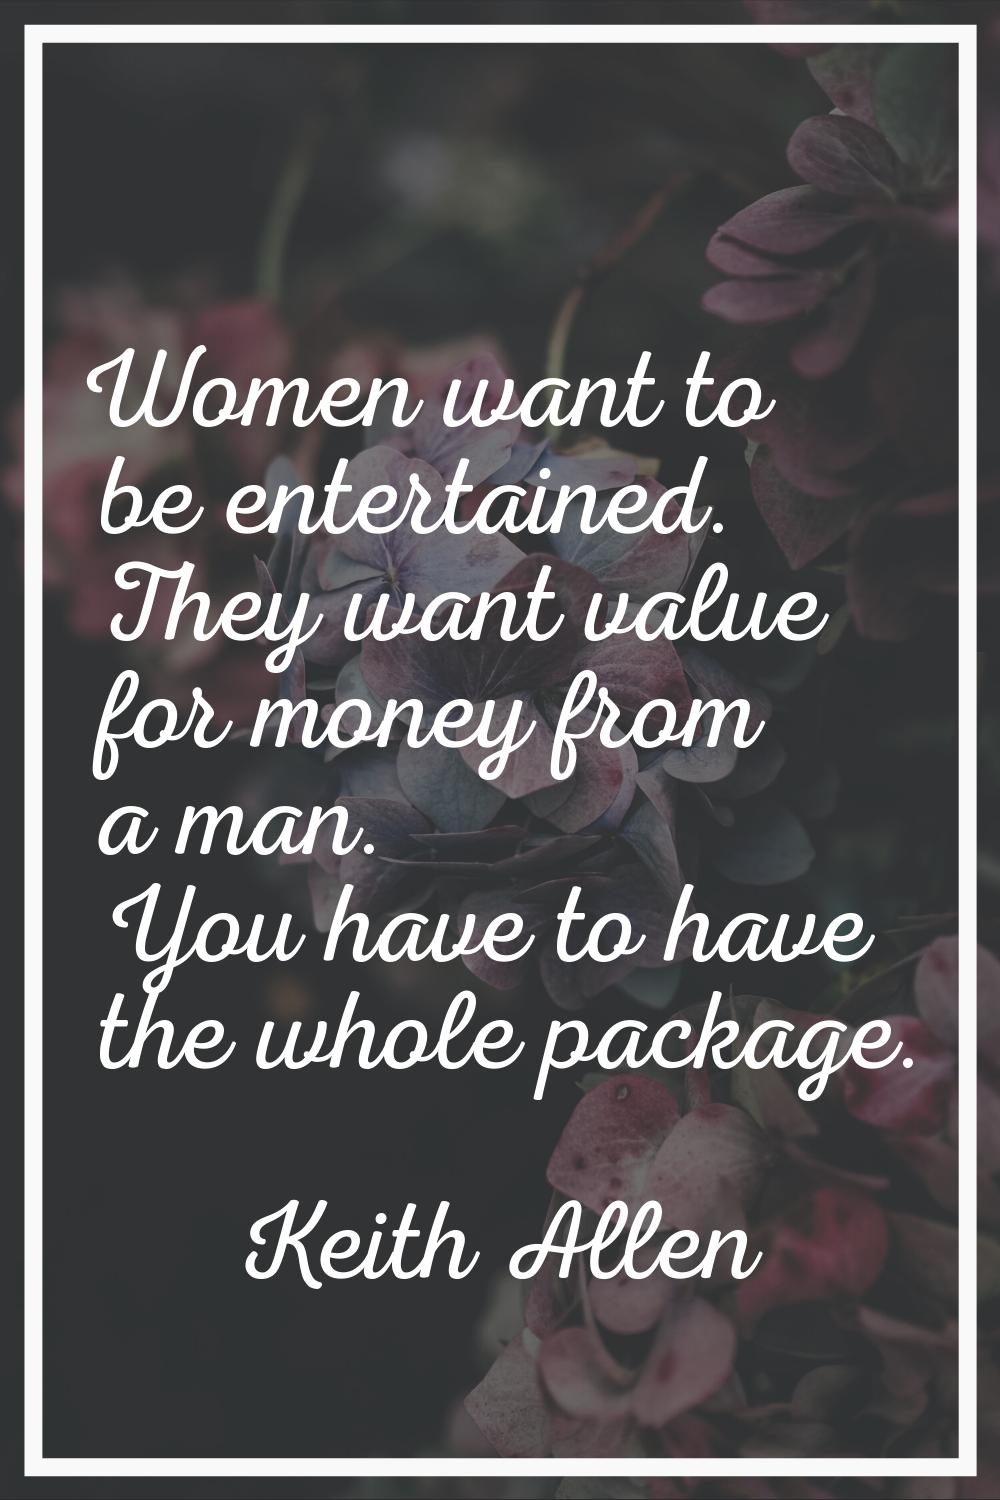 Women want to be entertained. They want value for money from a man. You have to have the whole pack